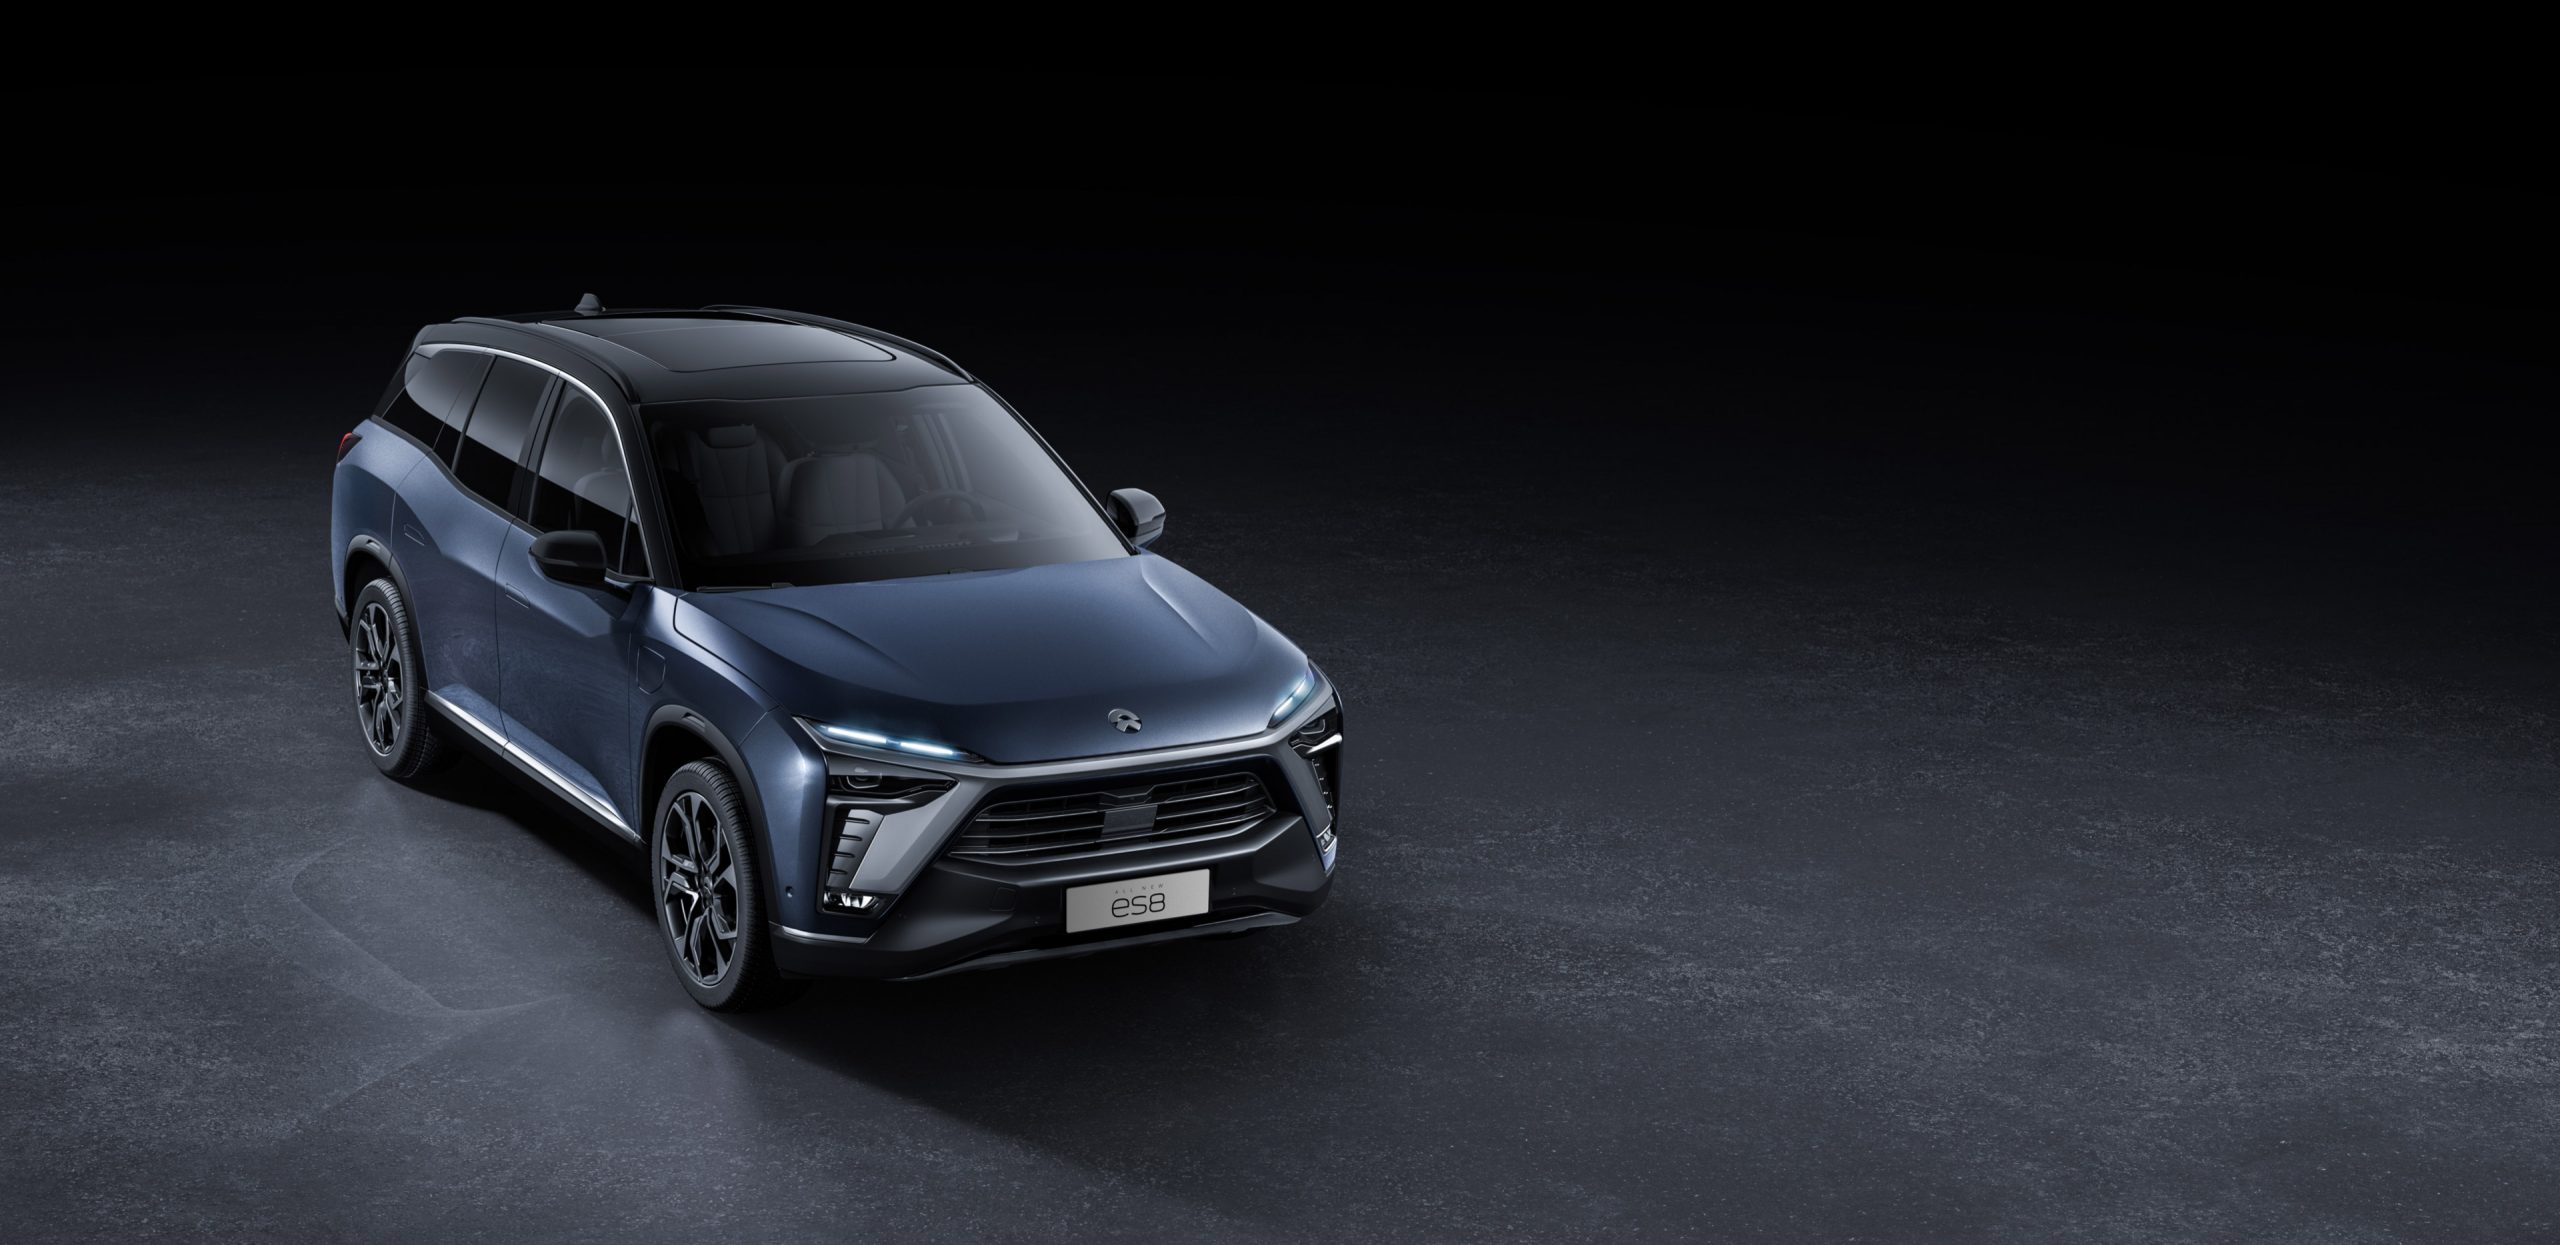 NIO's 2019: A rollercoaster ride of ups and downs.